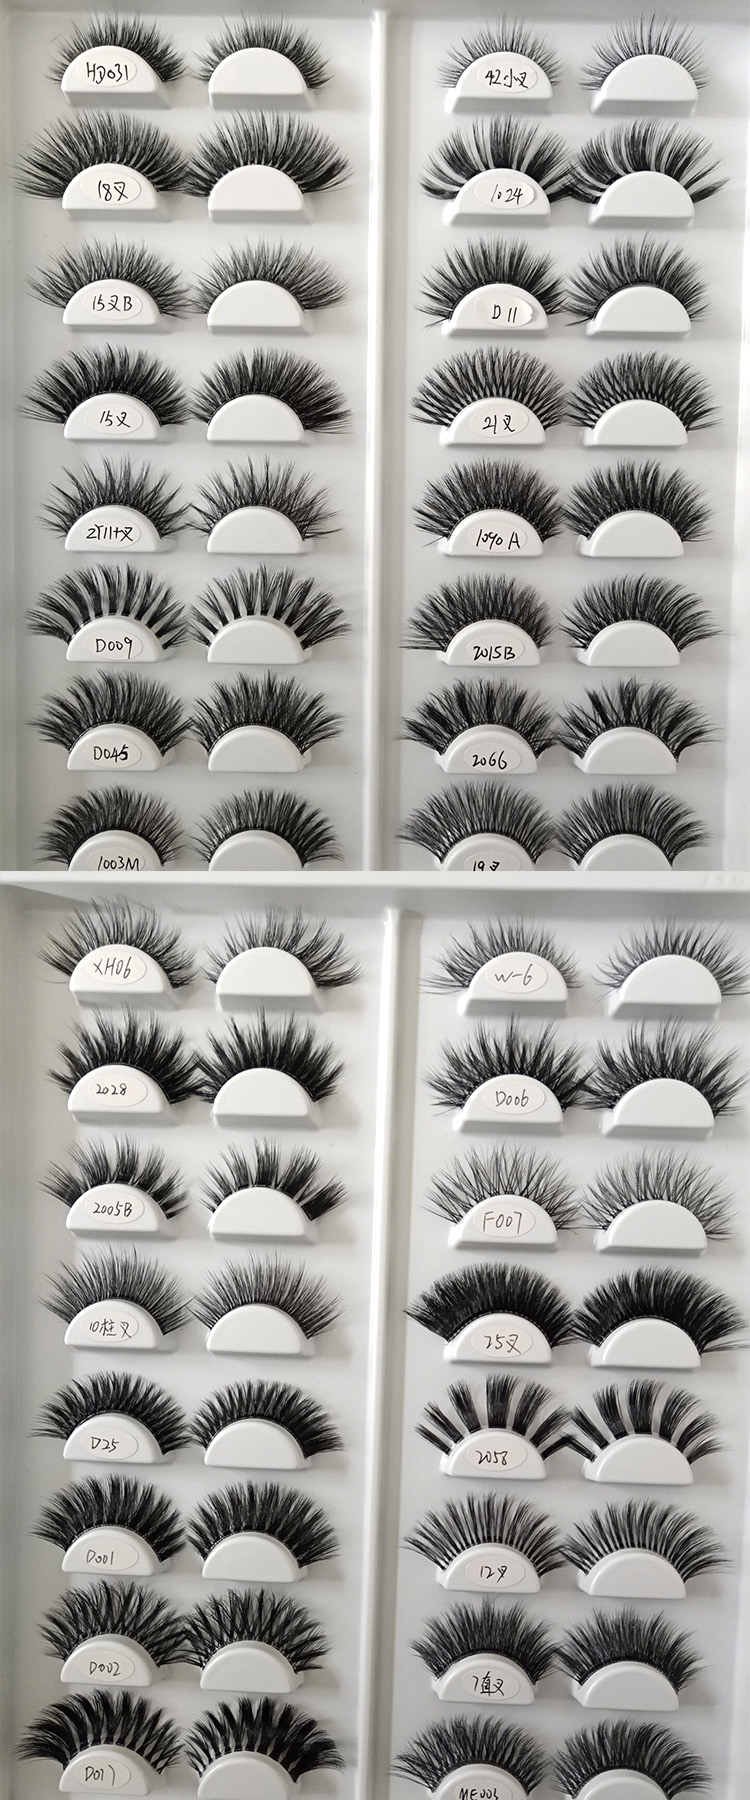 wholesale hundreds styles of 3d faux mink lashes China.jpg